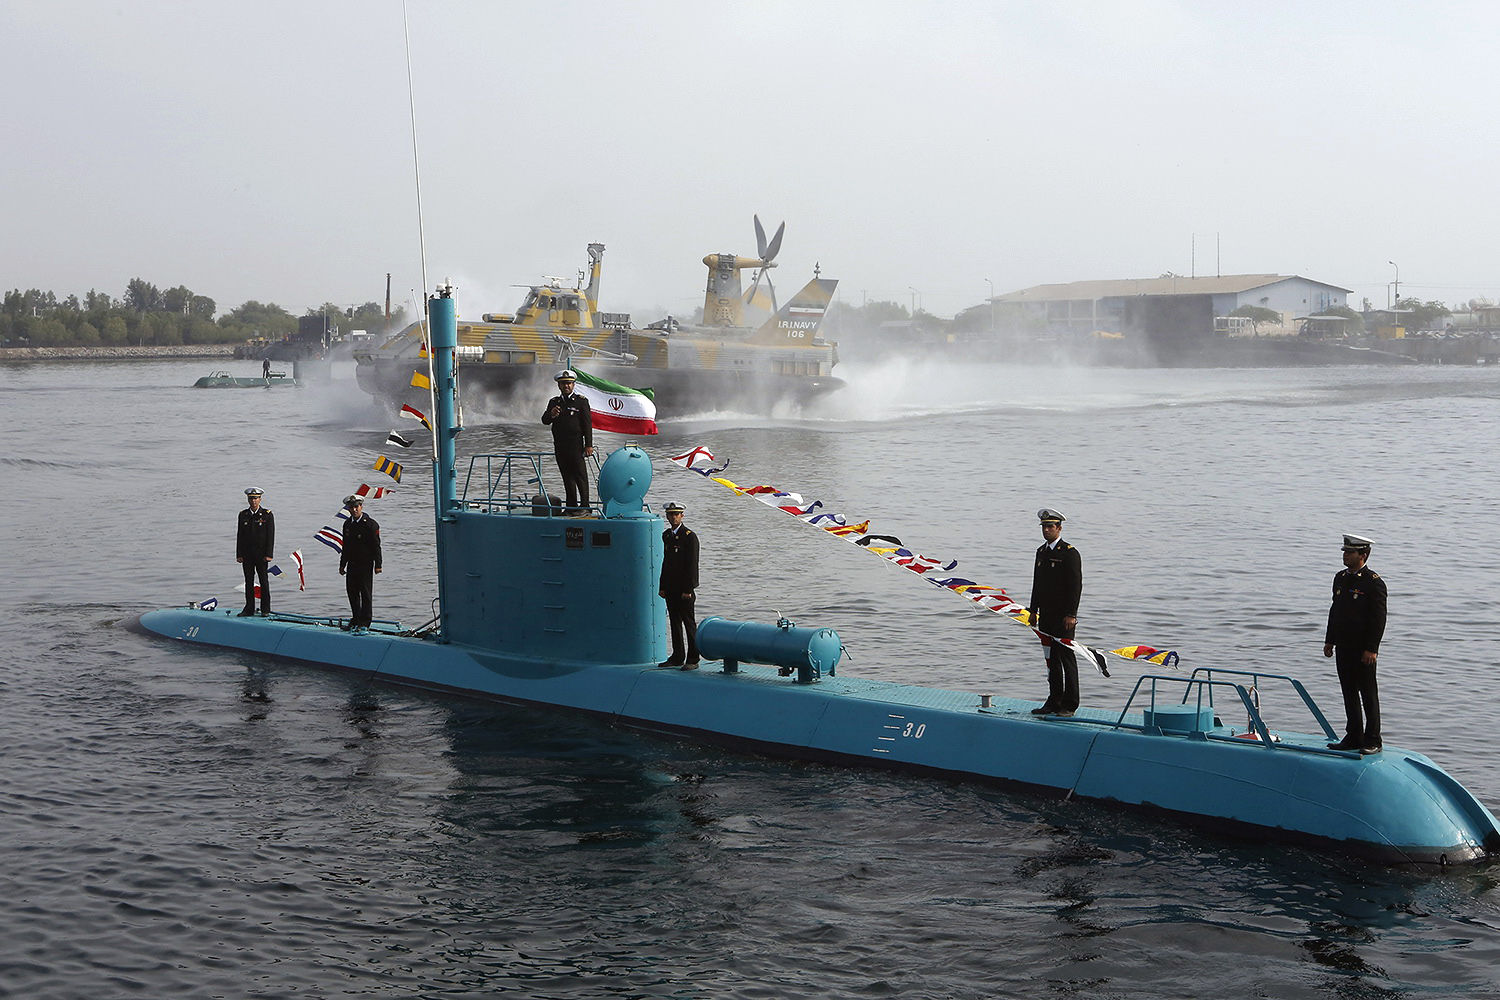 An Iranian Qadir light submarine and a hovercraft move in the Gulf waters in southern port of Bandar Abbas on November 28, 2012, after they were launched in an official ceremony. Iran boosted its naval power in Gulf waters after a new missile launching vessel and two light submarines joined its Navy fleet. AFP PHOTO/MEHR NEWS/AHMAD JAFARI